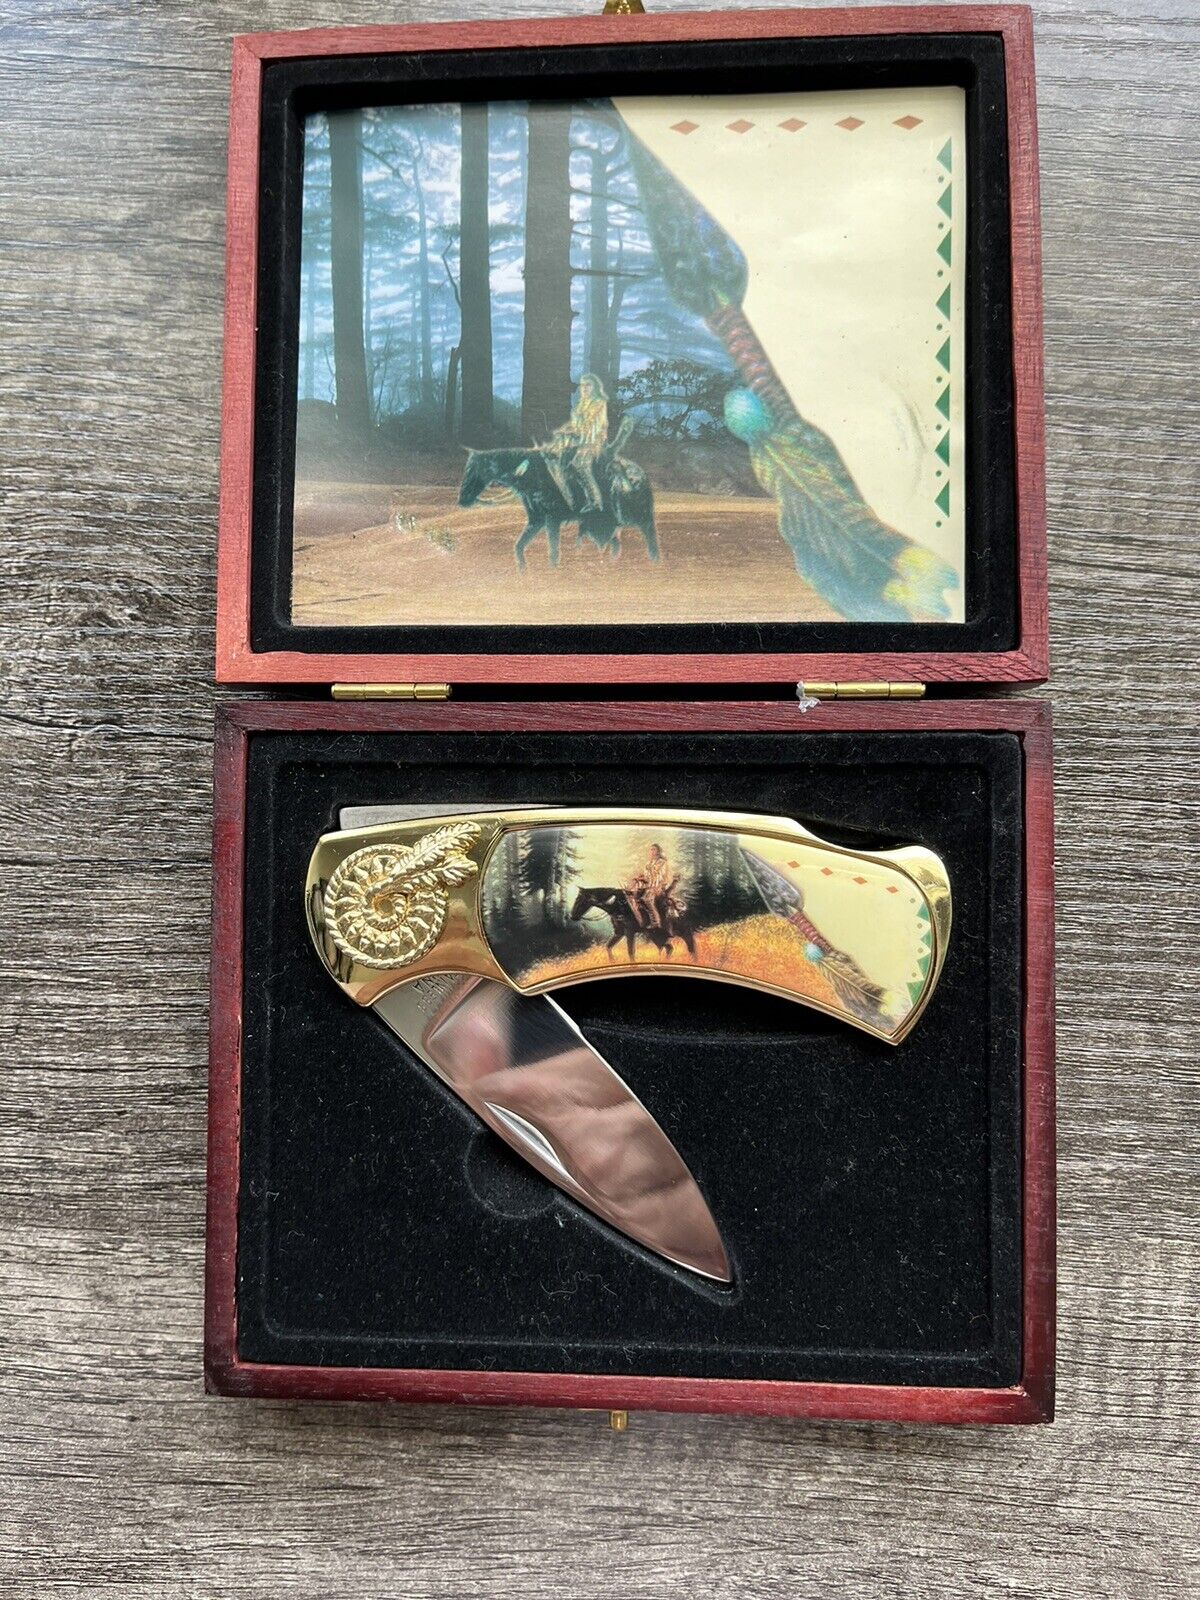 Folding Knife - Native American Indian Theme in Collector Box